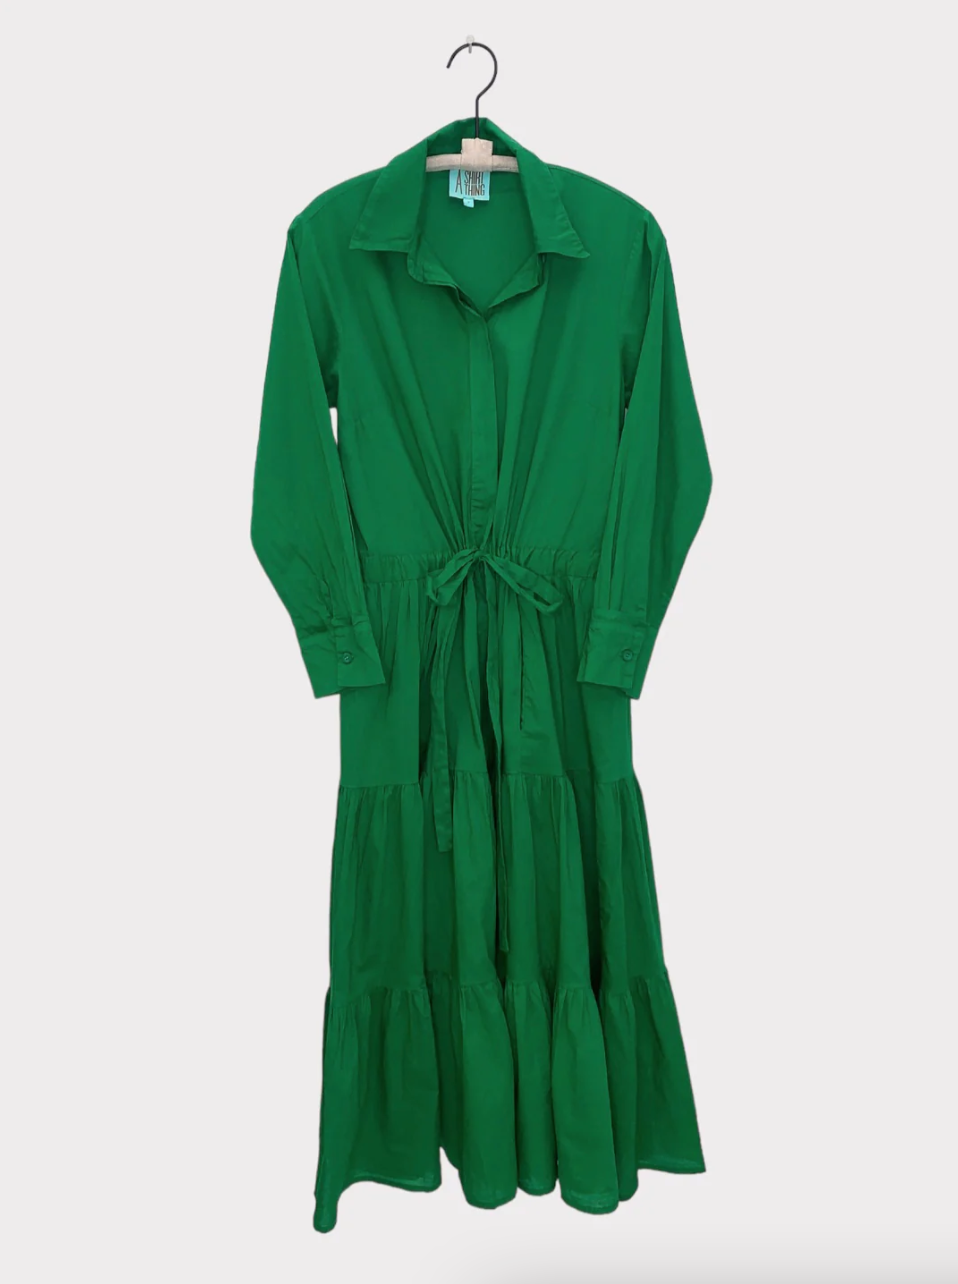 A bright green mid-length dress with long sleeves and a cotton drawstring waist, displayed on a hanger against a plain white background.